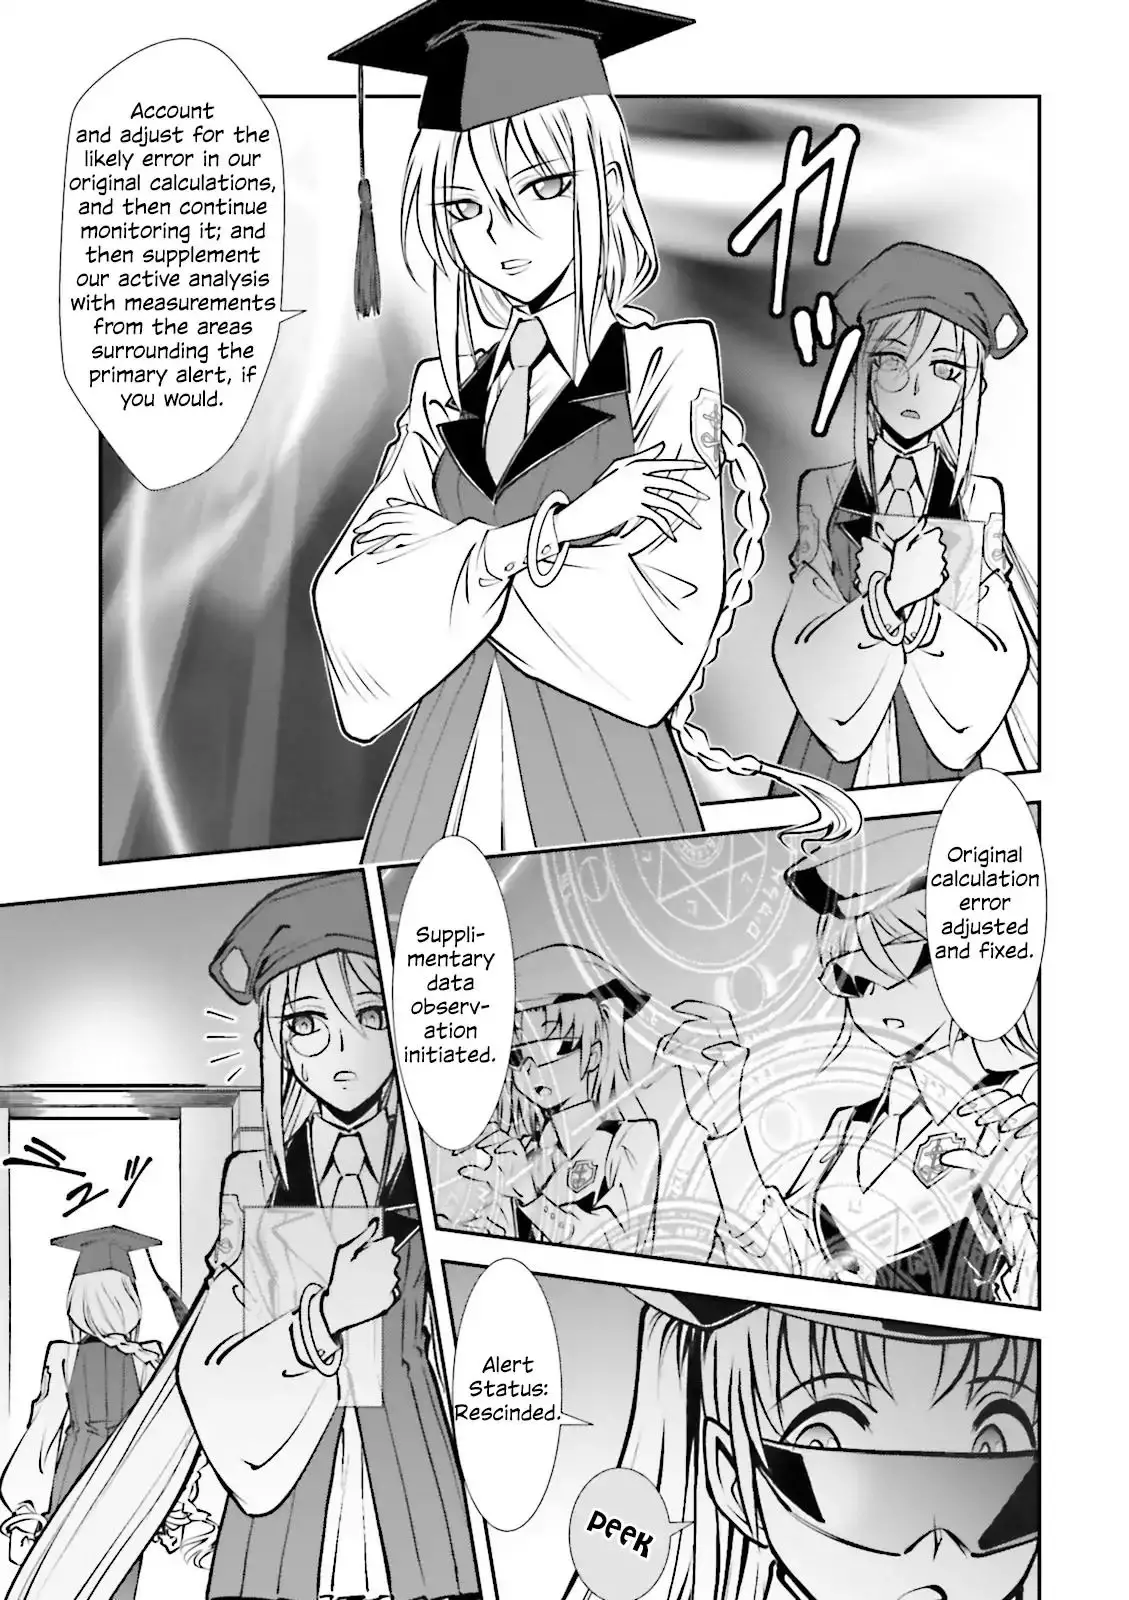 Melty Blood - Back Alley Alliance Nightmare - 3 page 7